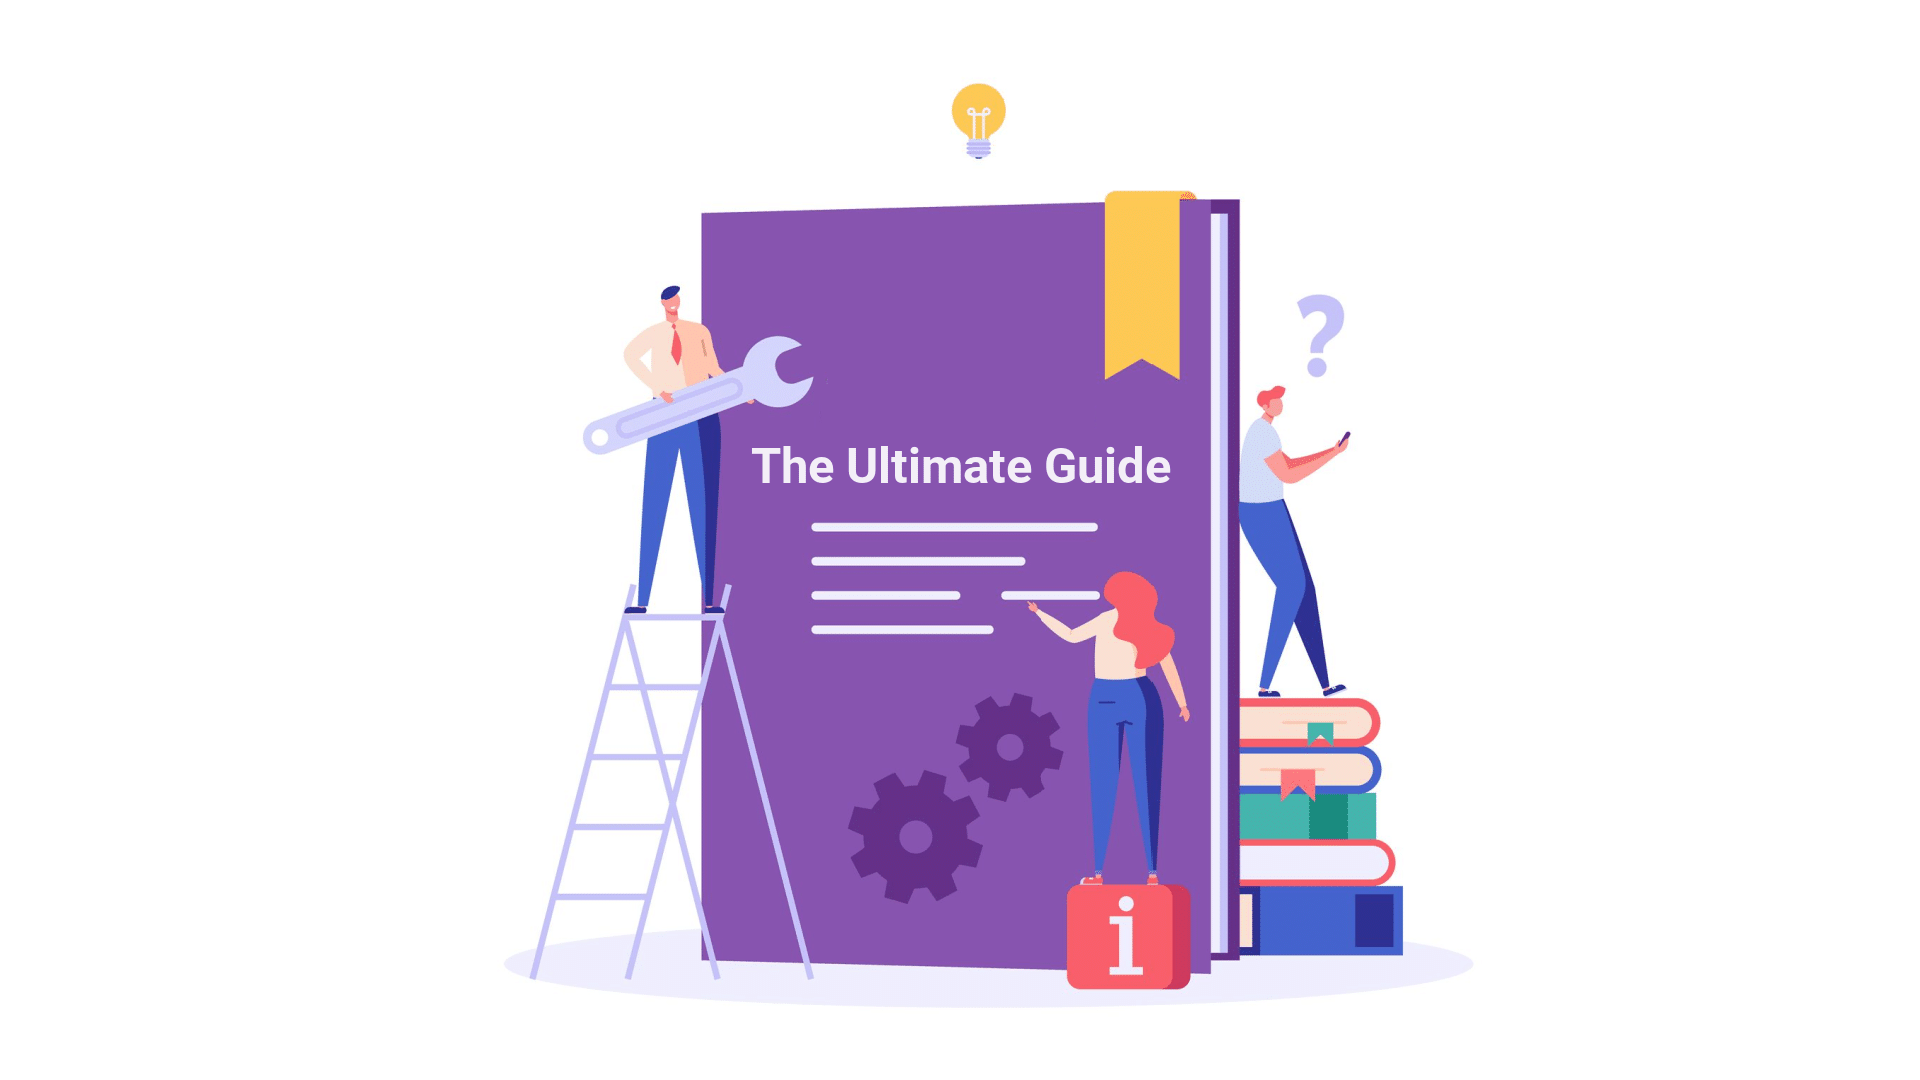 How to create a guide that is optimized, useful and comprehensive